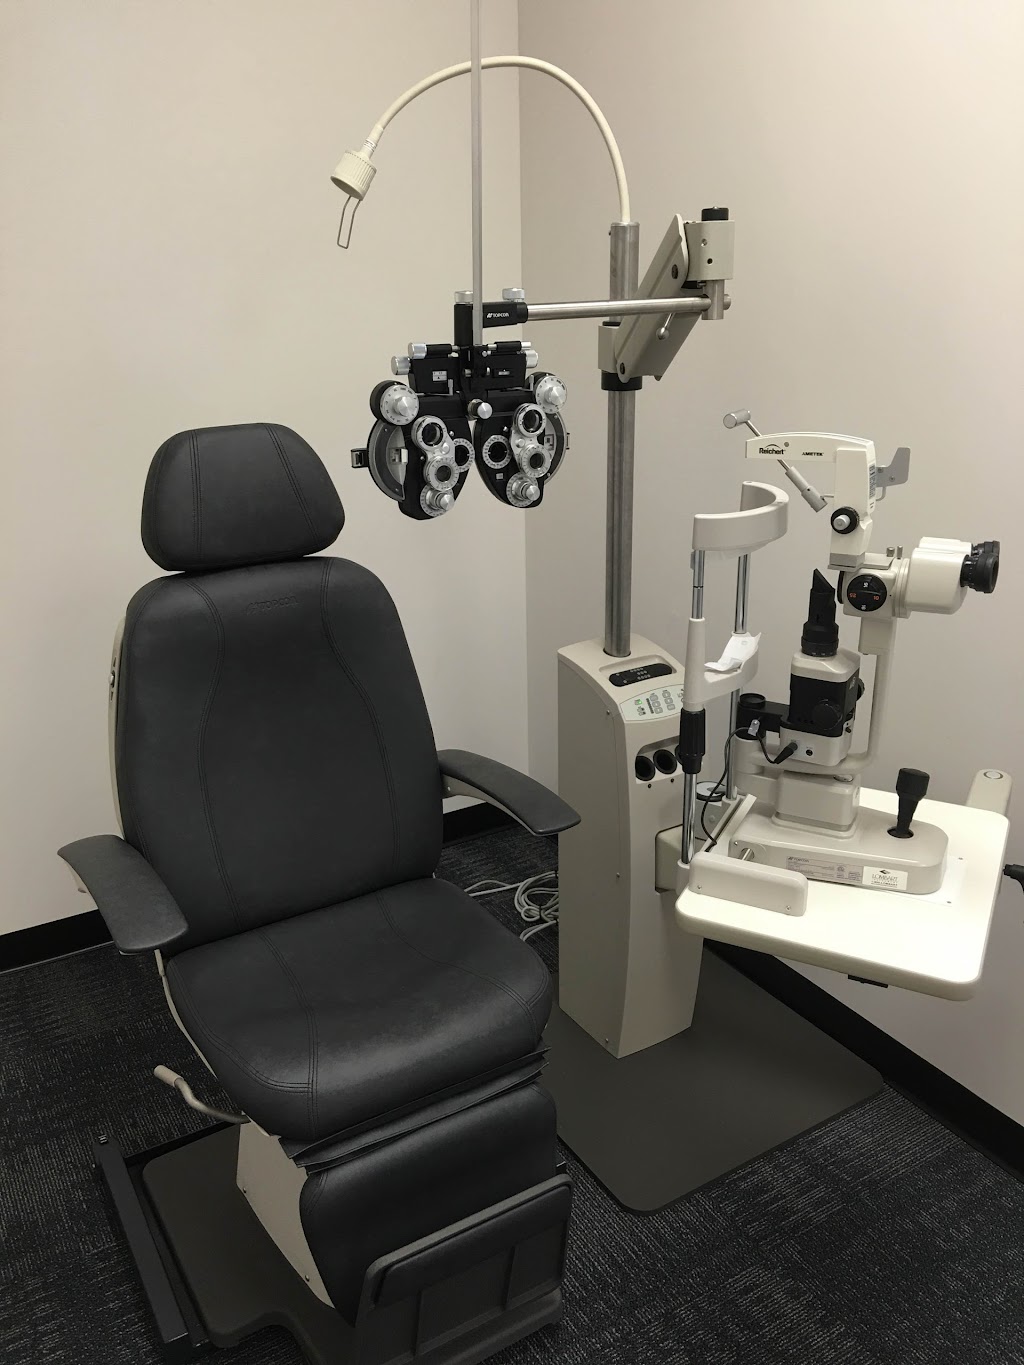 Oakland Vision and Hearing Center | 350 Ramapo Valley Rd, Oakland, NJ 07436 | Phone: (201) 651-1212